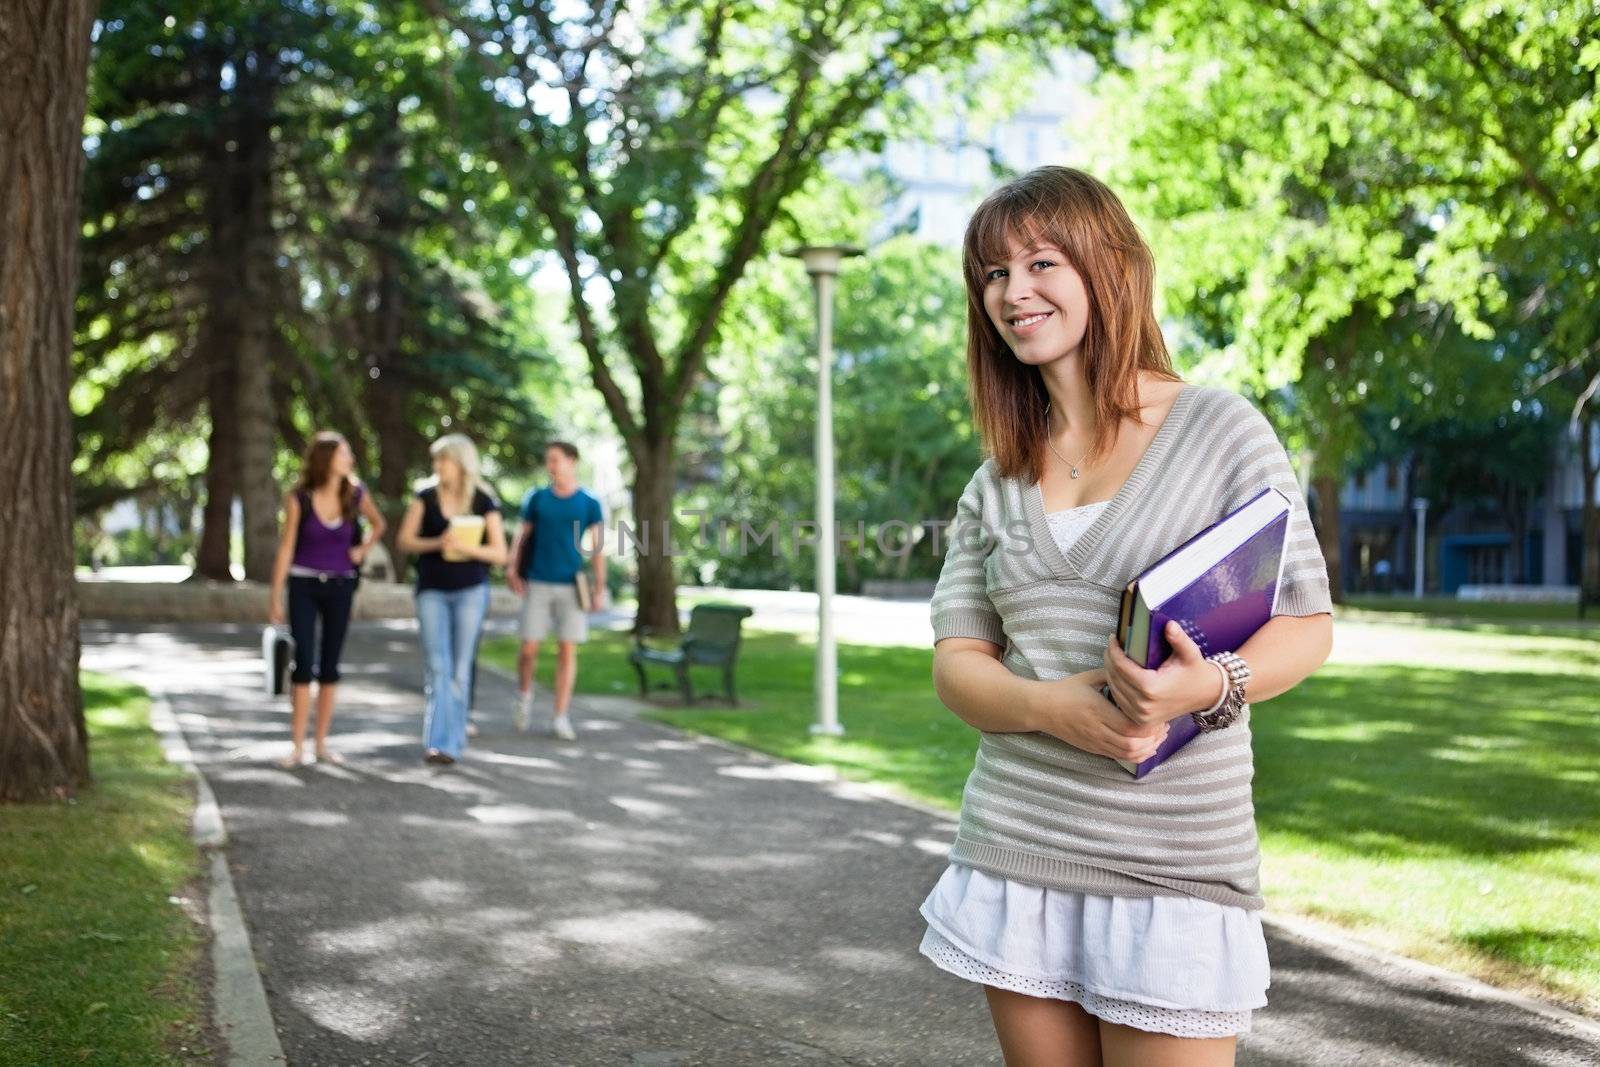 Portrait of girl standing with a book while her friends walking in background